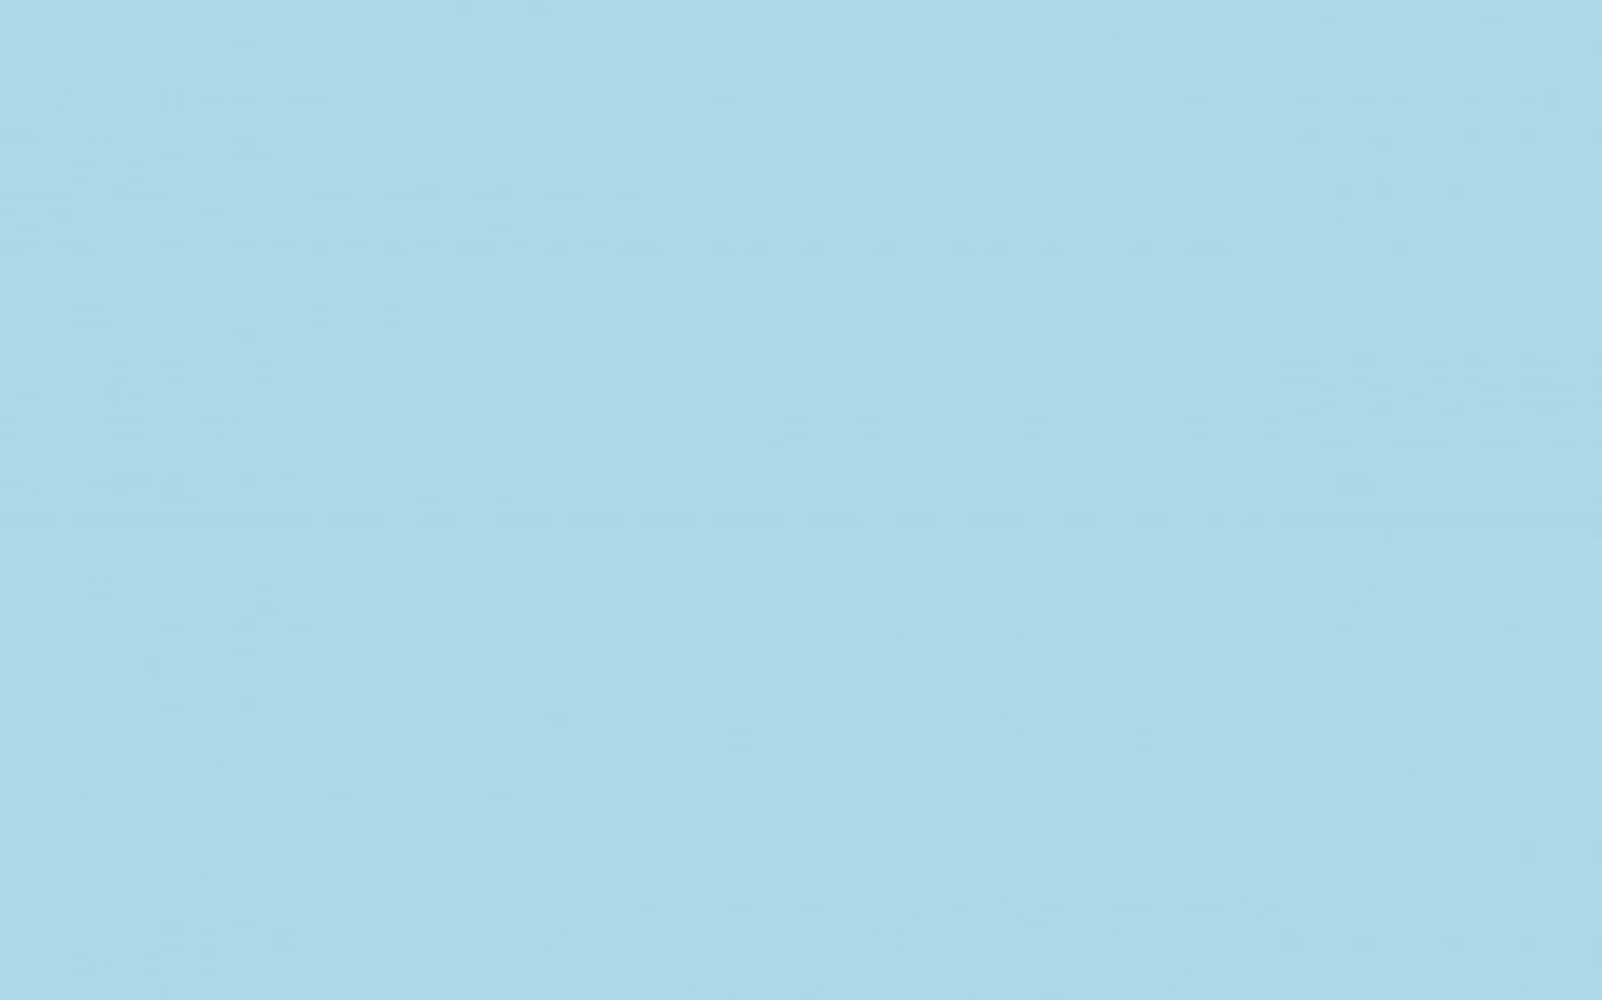 Solid Soft Baby Blue Color Background